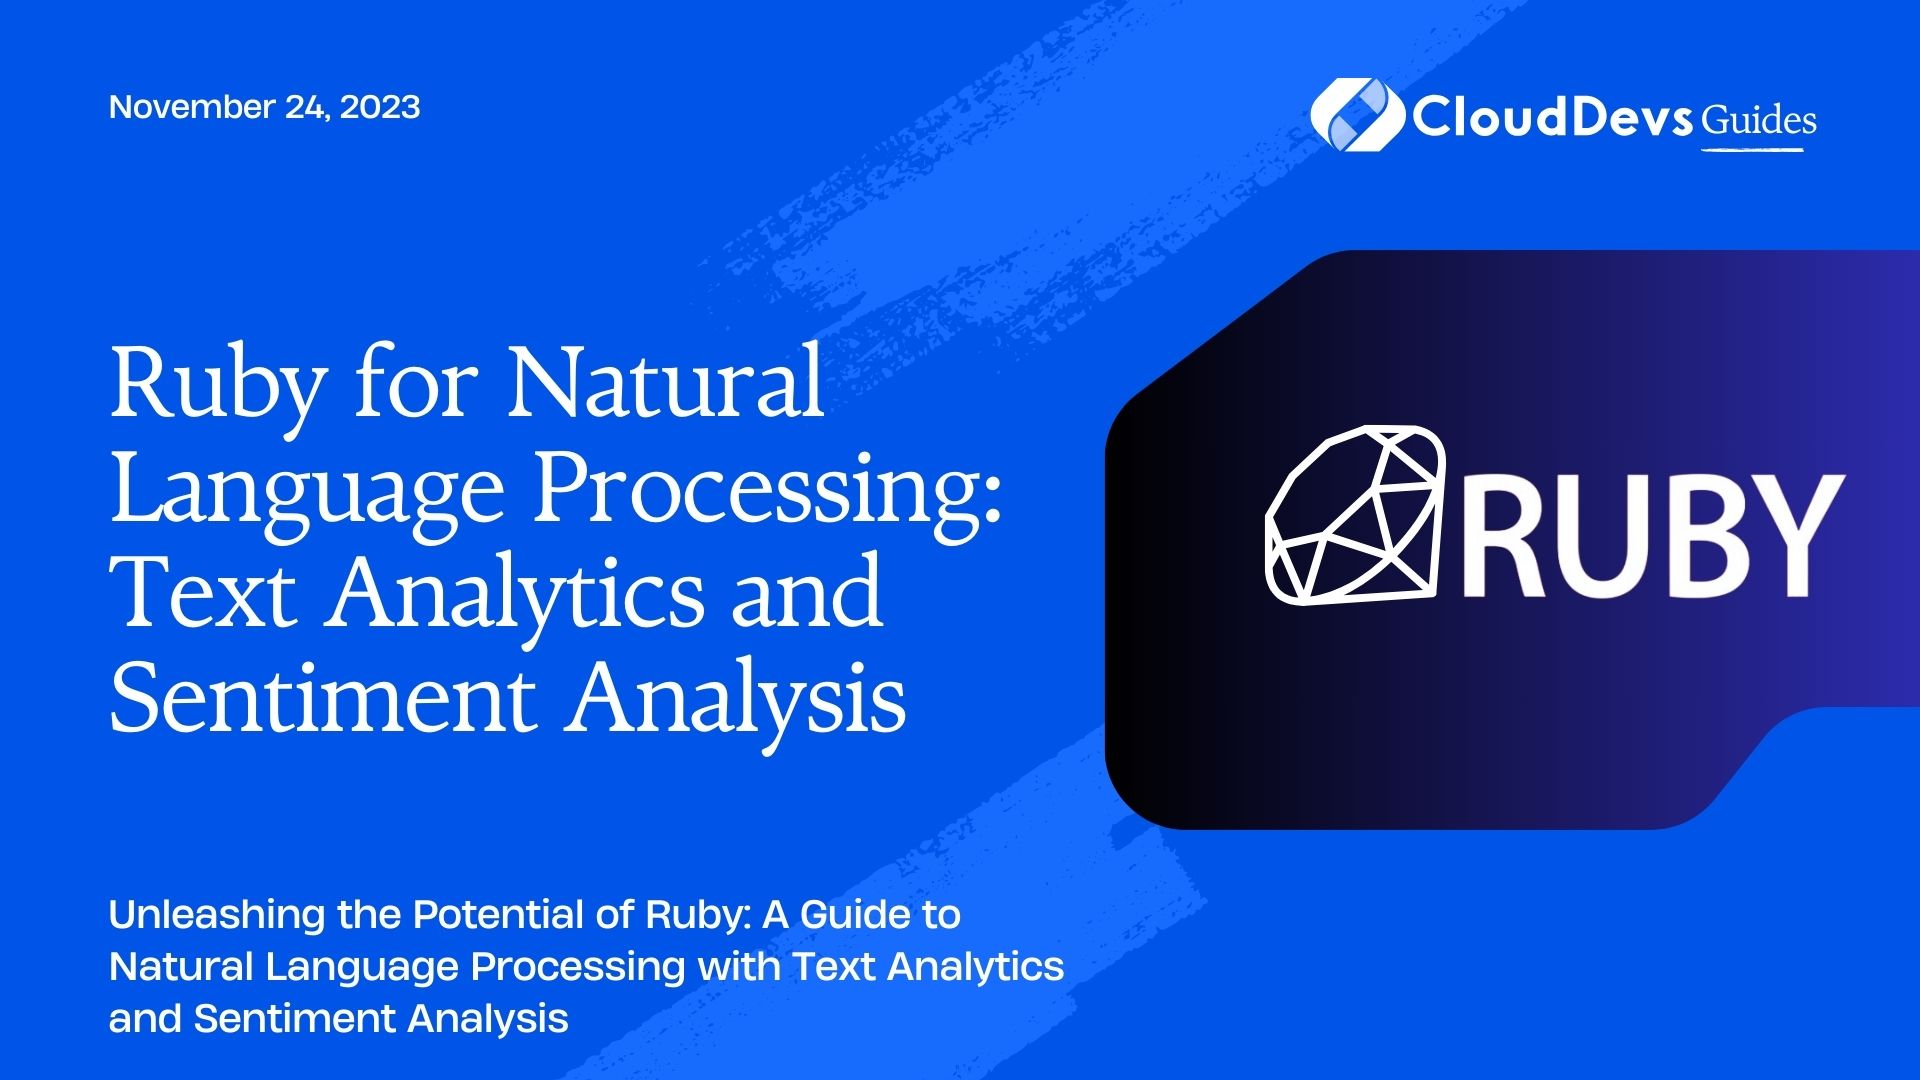 Ruby for Natural Language Processing: Text Analytics and Sentiment Analysis